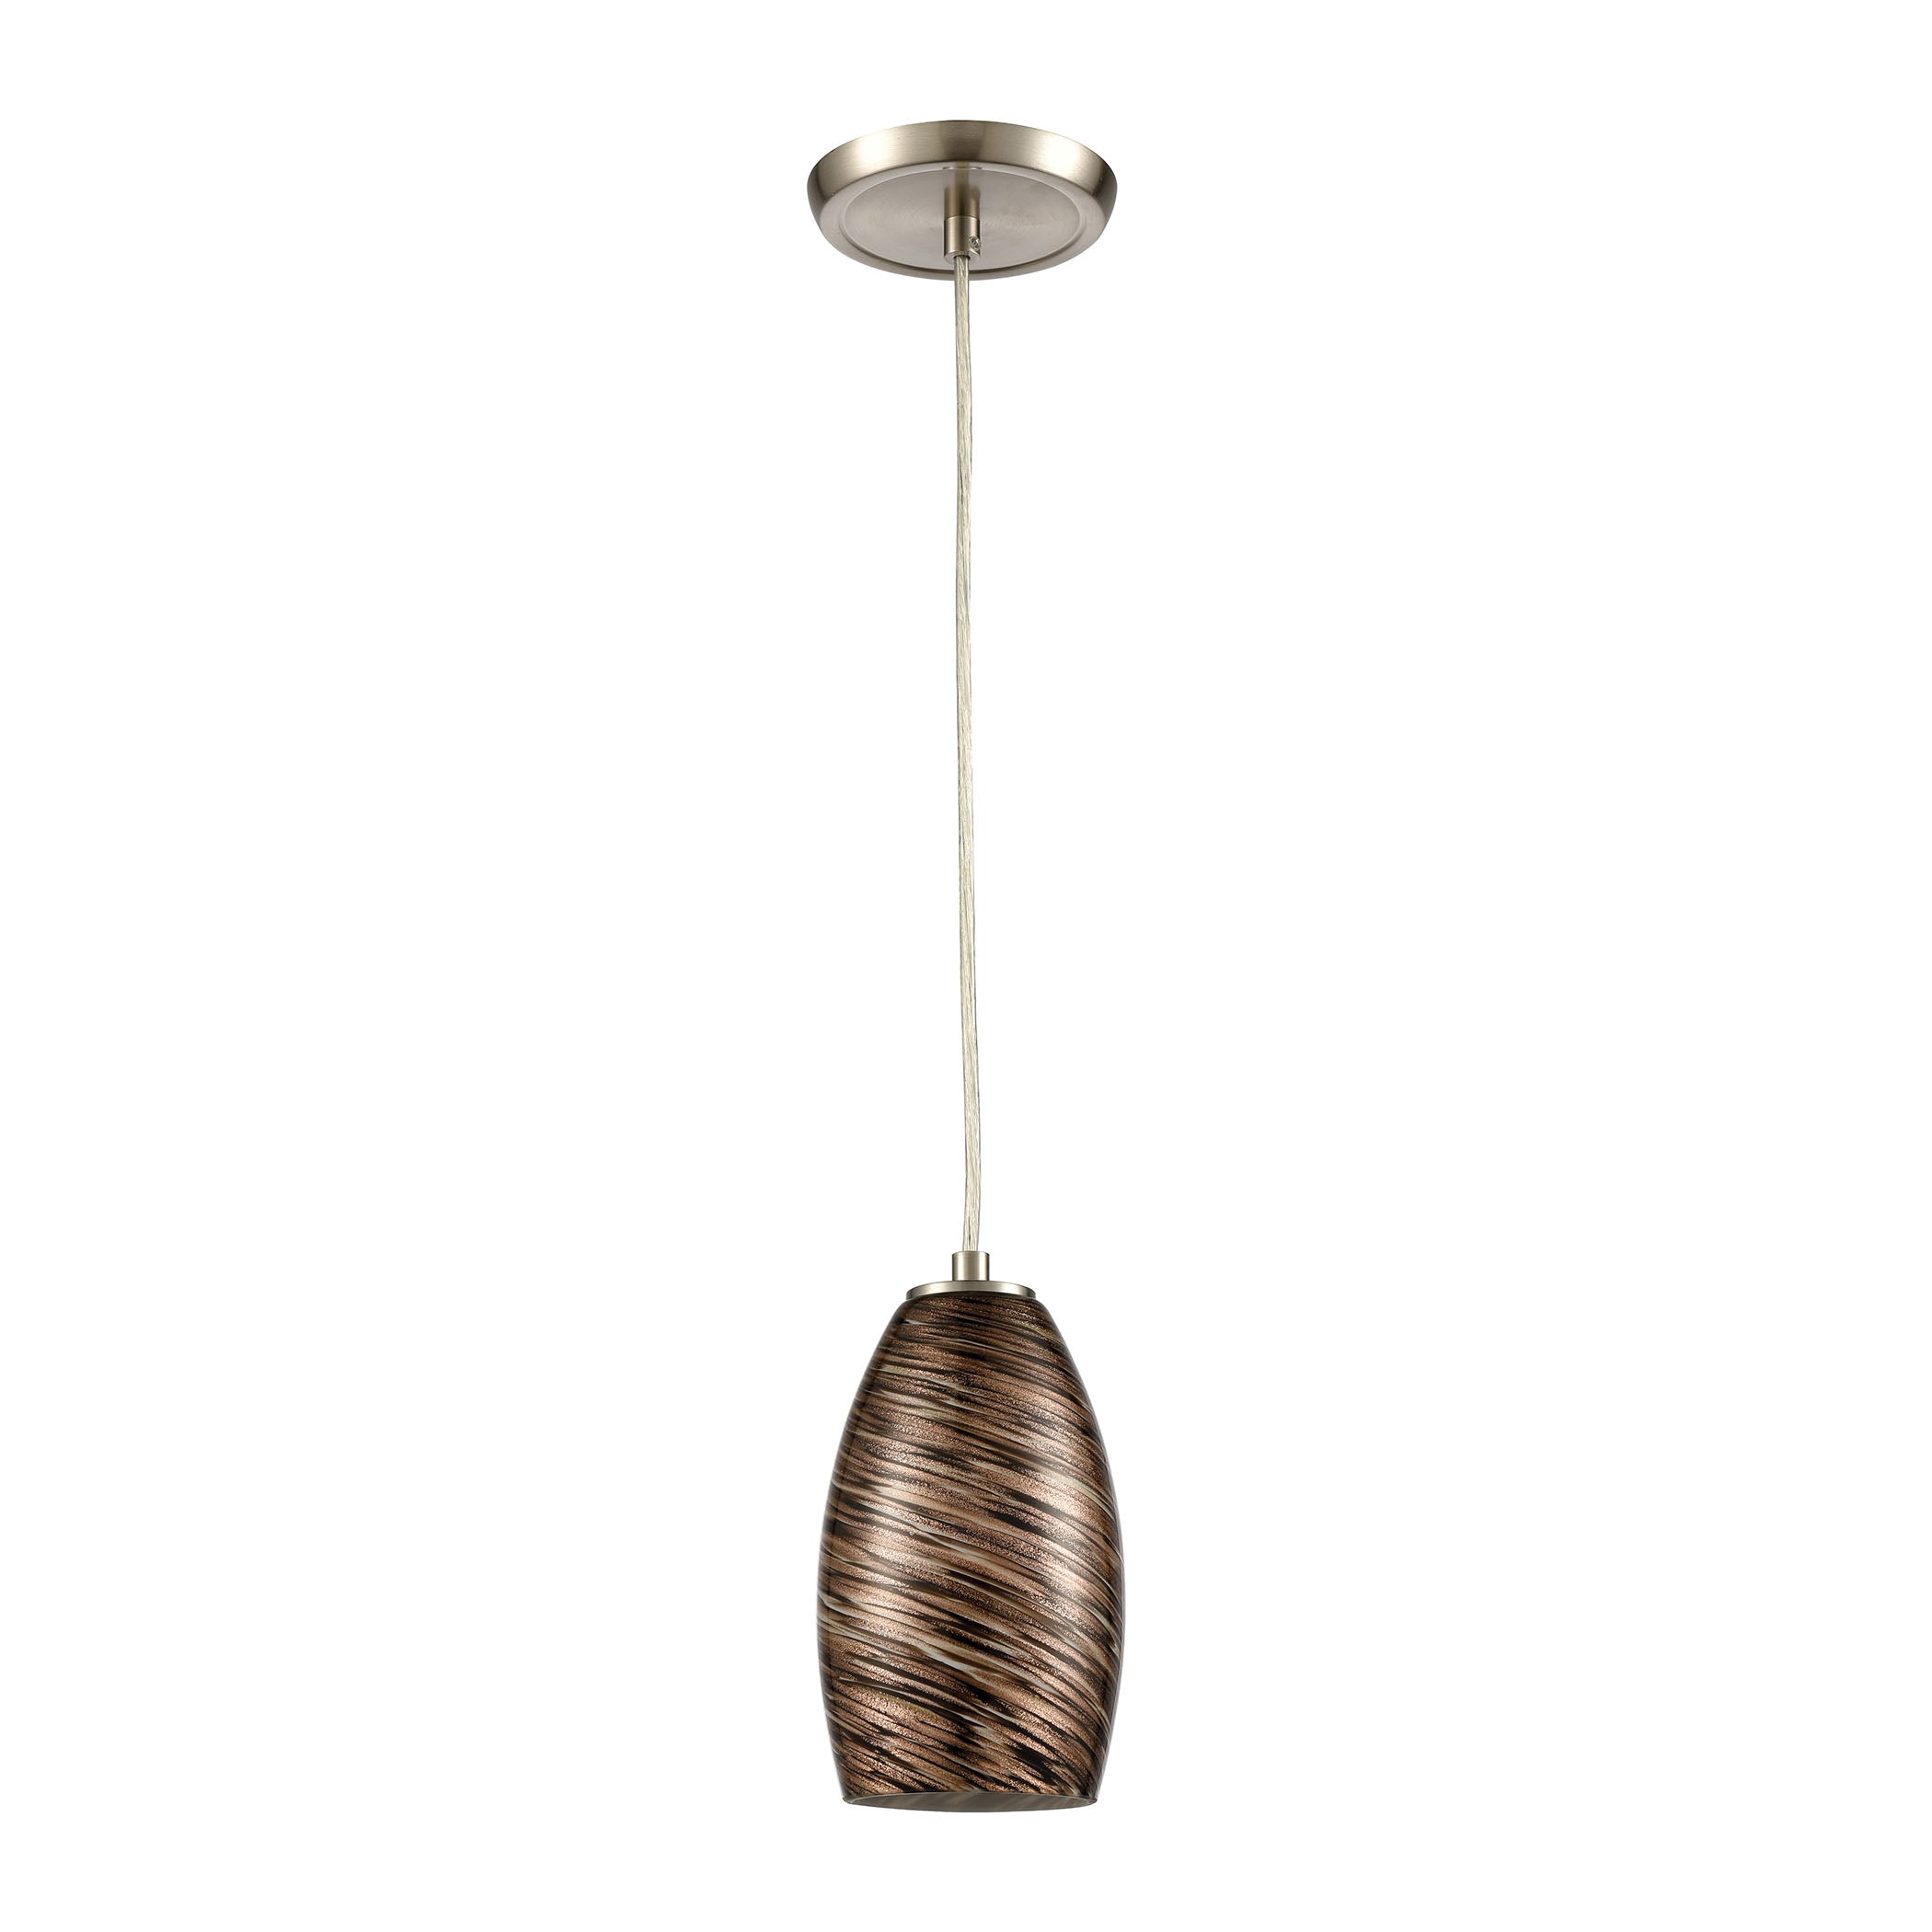 ELK Lighting 30230/1 Tornado 1-Light Mini Pendant in Satin Nickel with Brown Toned and Gold Speckled Glass